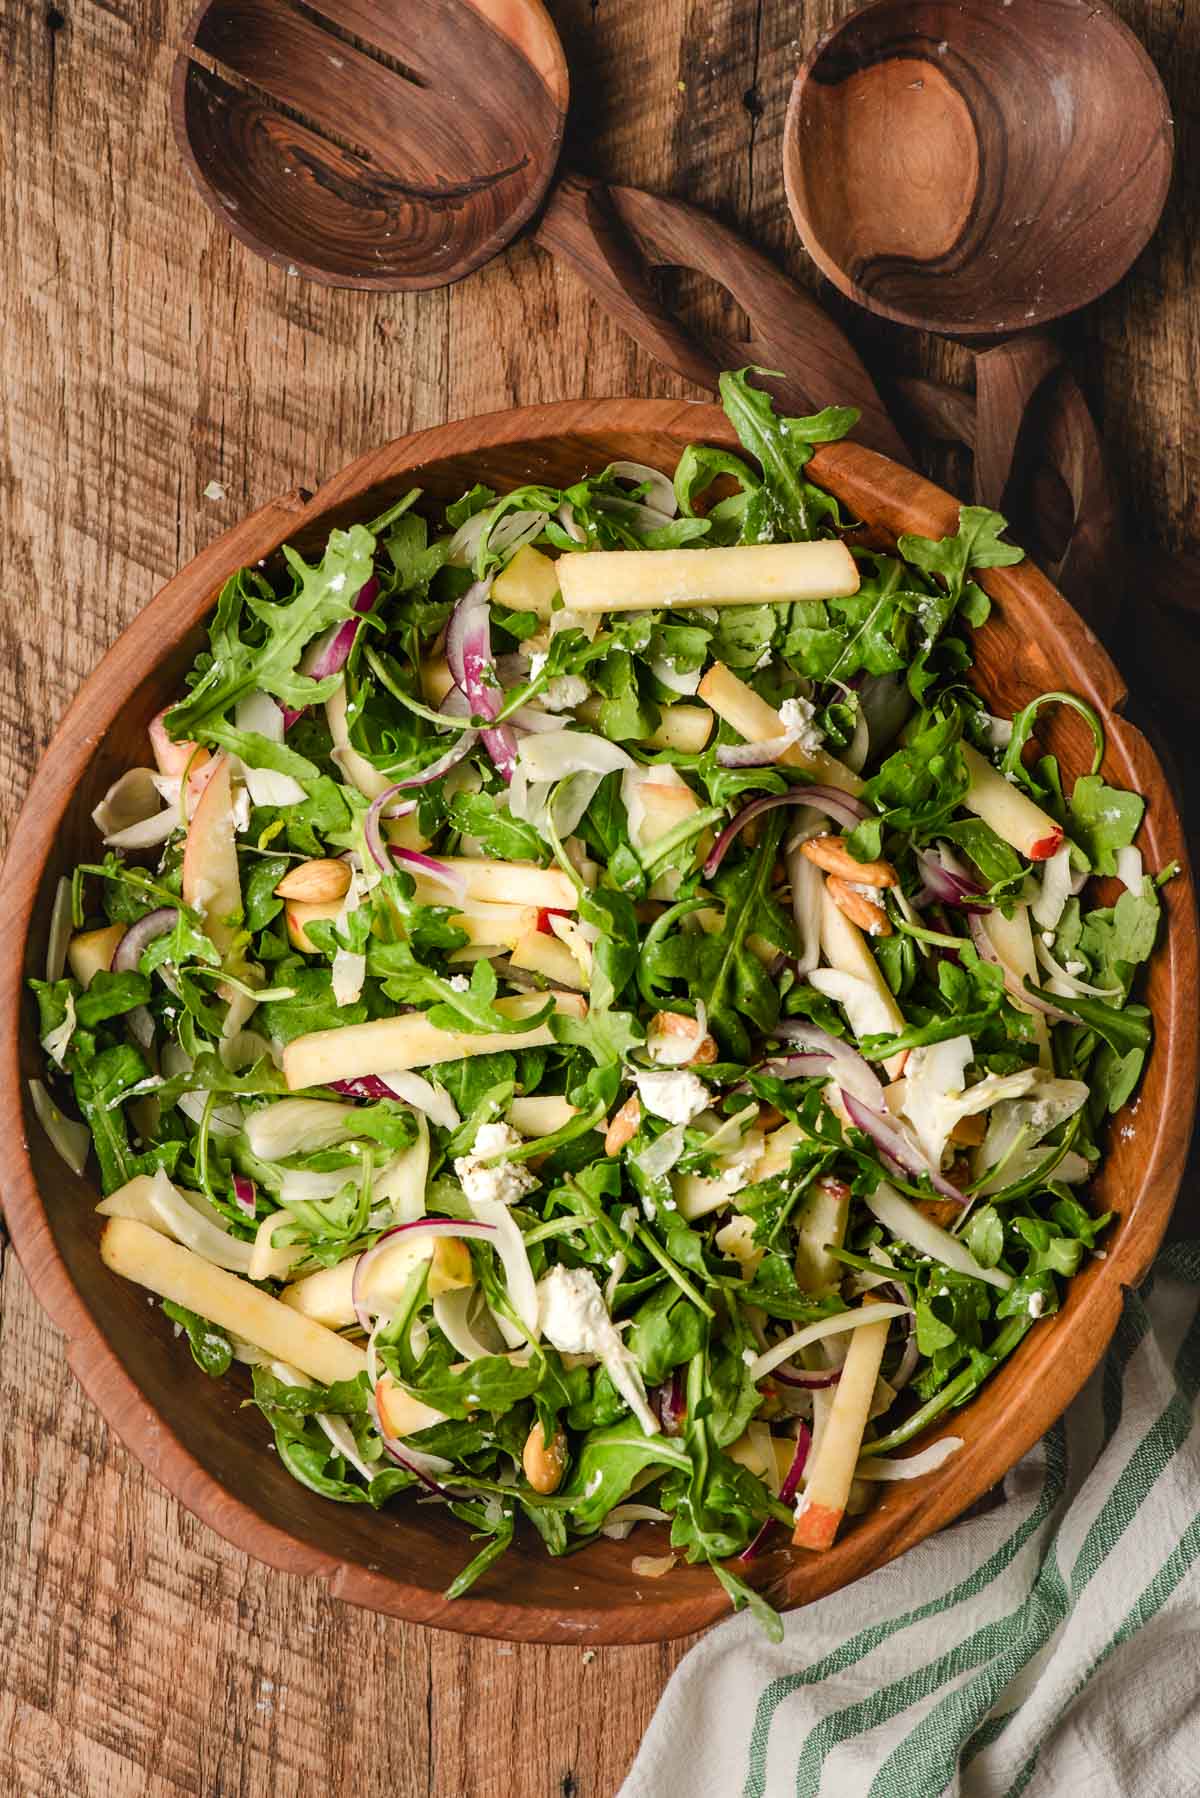 Arugula salad with fennel, apple, goat cheese, and red onion in a wooden trencher with decorative wooden salad spoons.